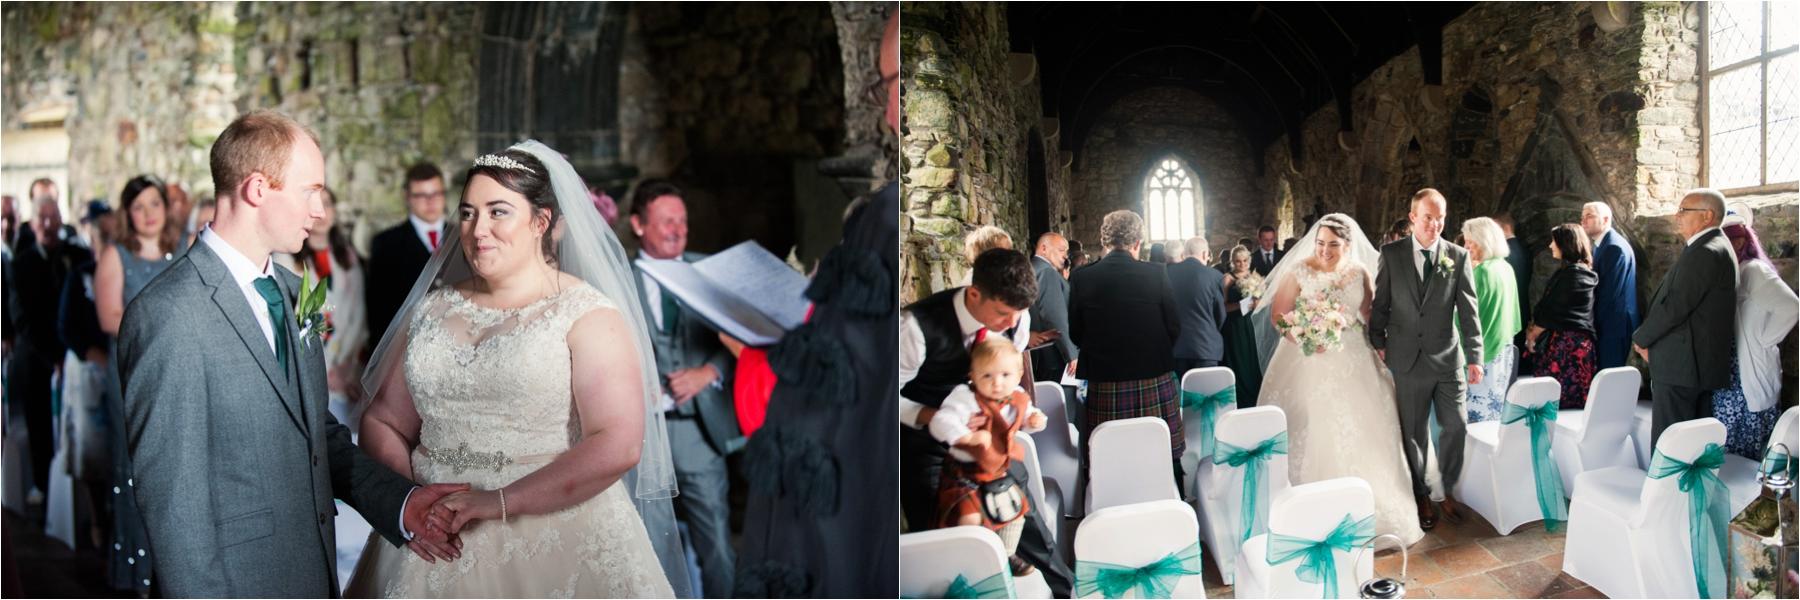 guests celebrate the marriage at rodel church isle of harris photos